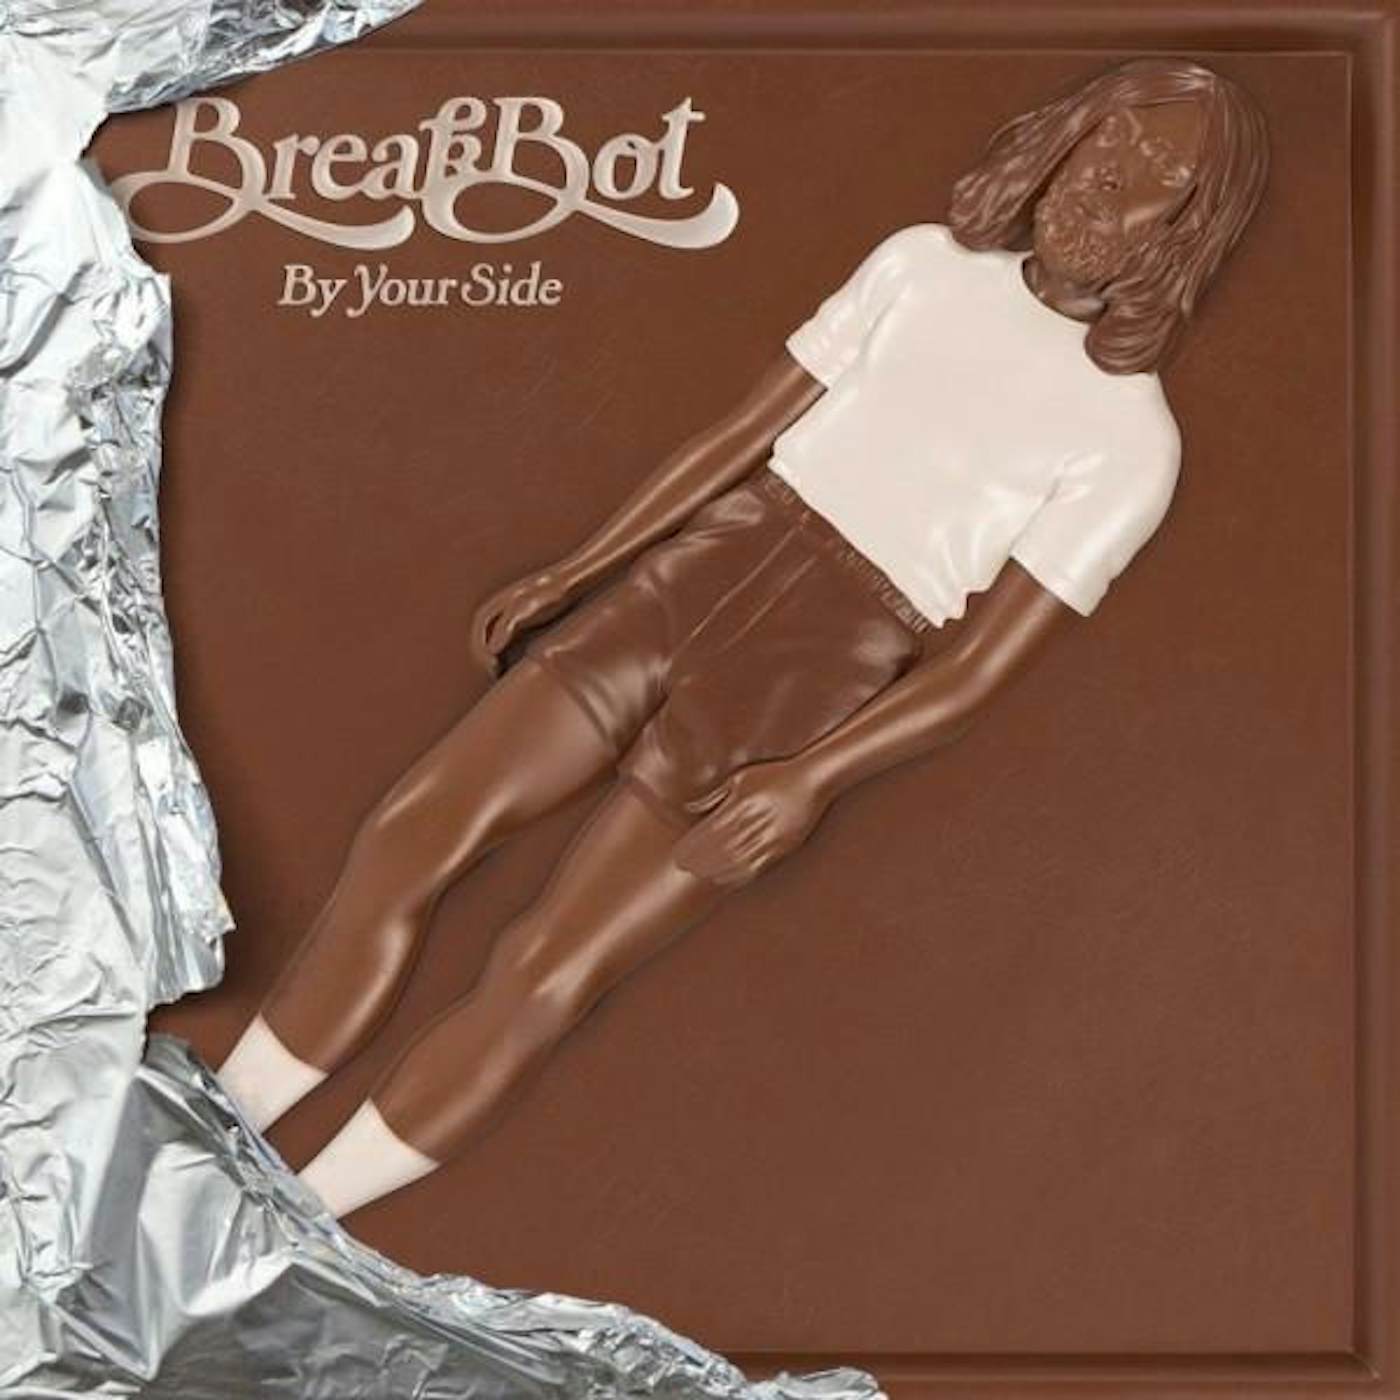 Breakbot BY YOUR SIDE (HOL) (Vinyl)